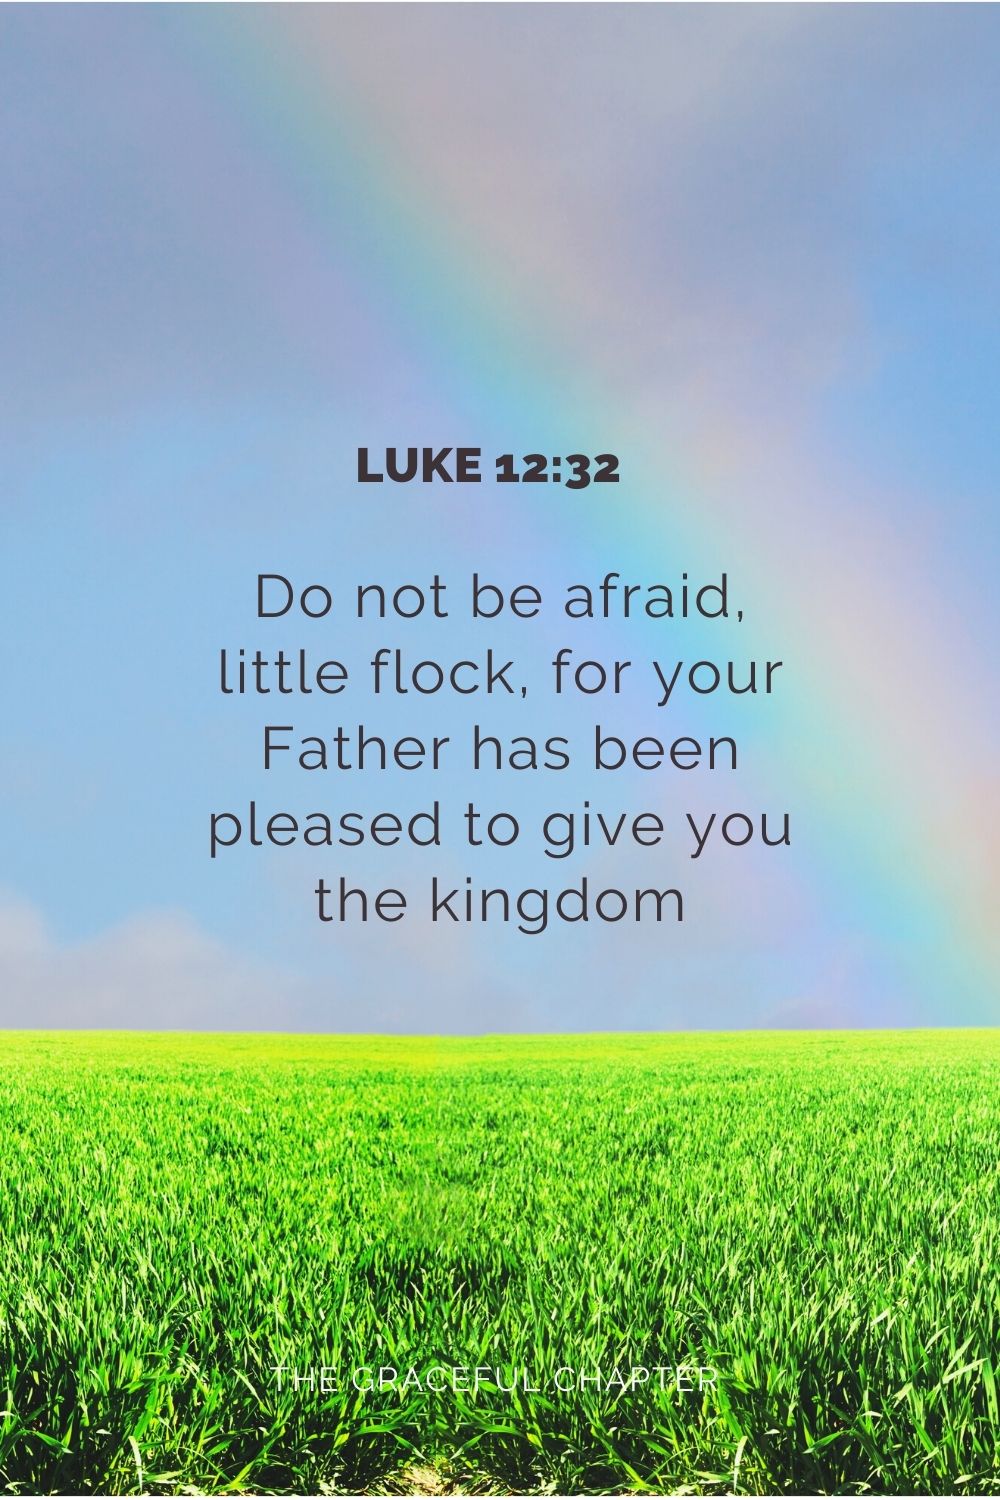 Do not be afraid, little flock, for your Father has been pleased to give you the kingdom. Luke 12:32